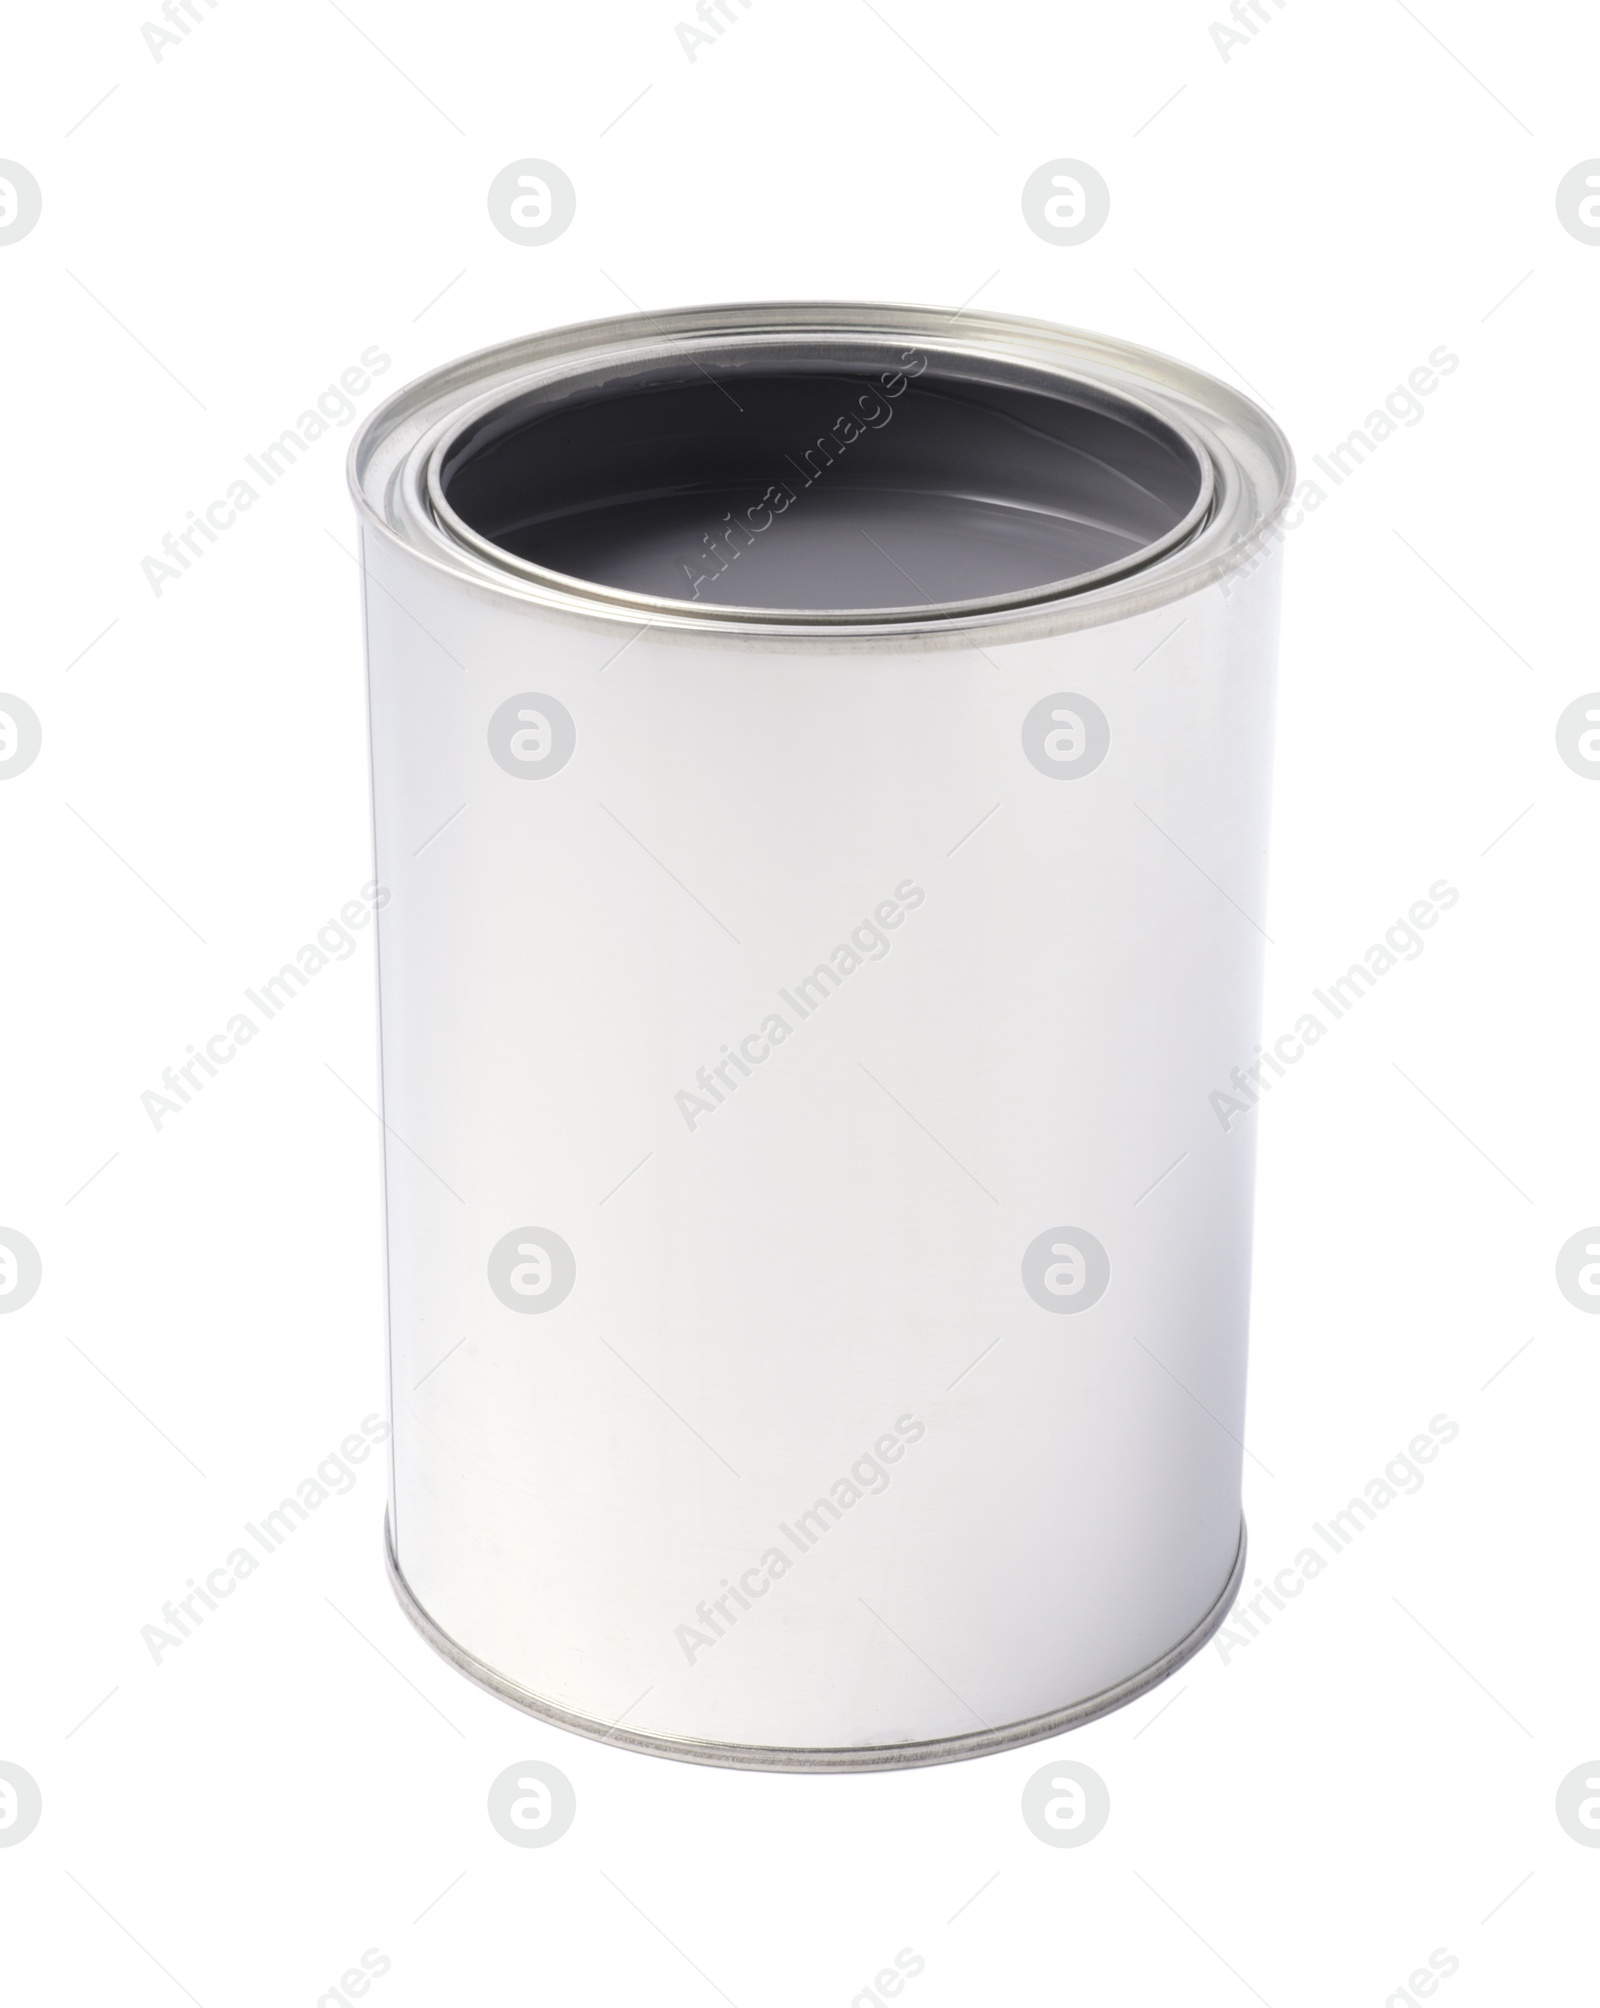 Photo of Can with gray paint on white background